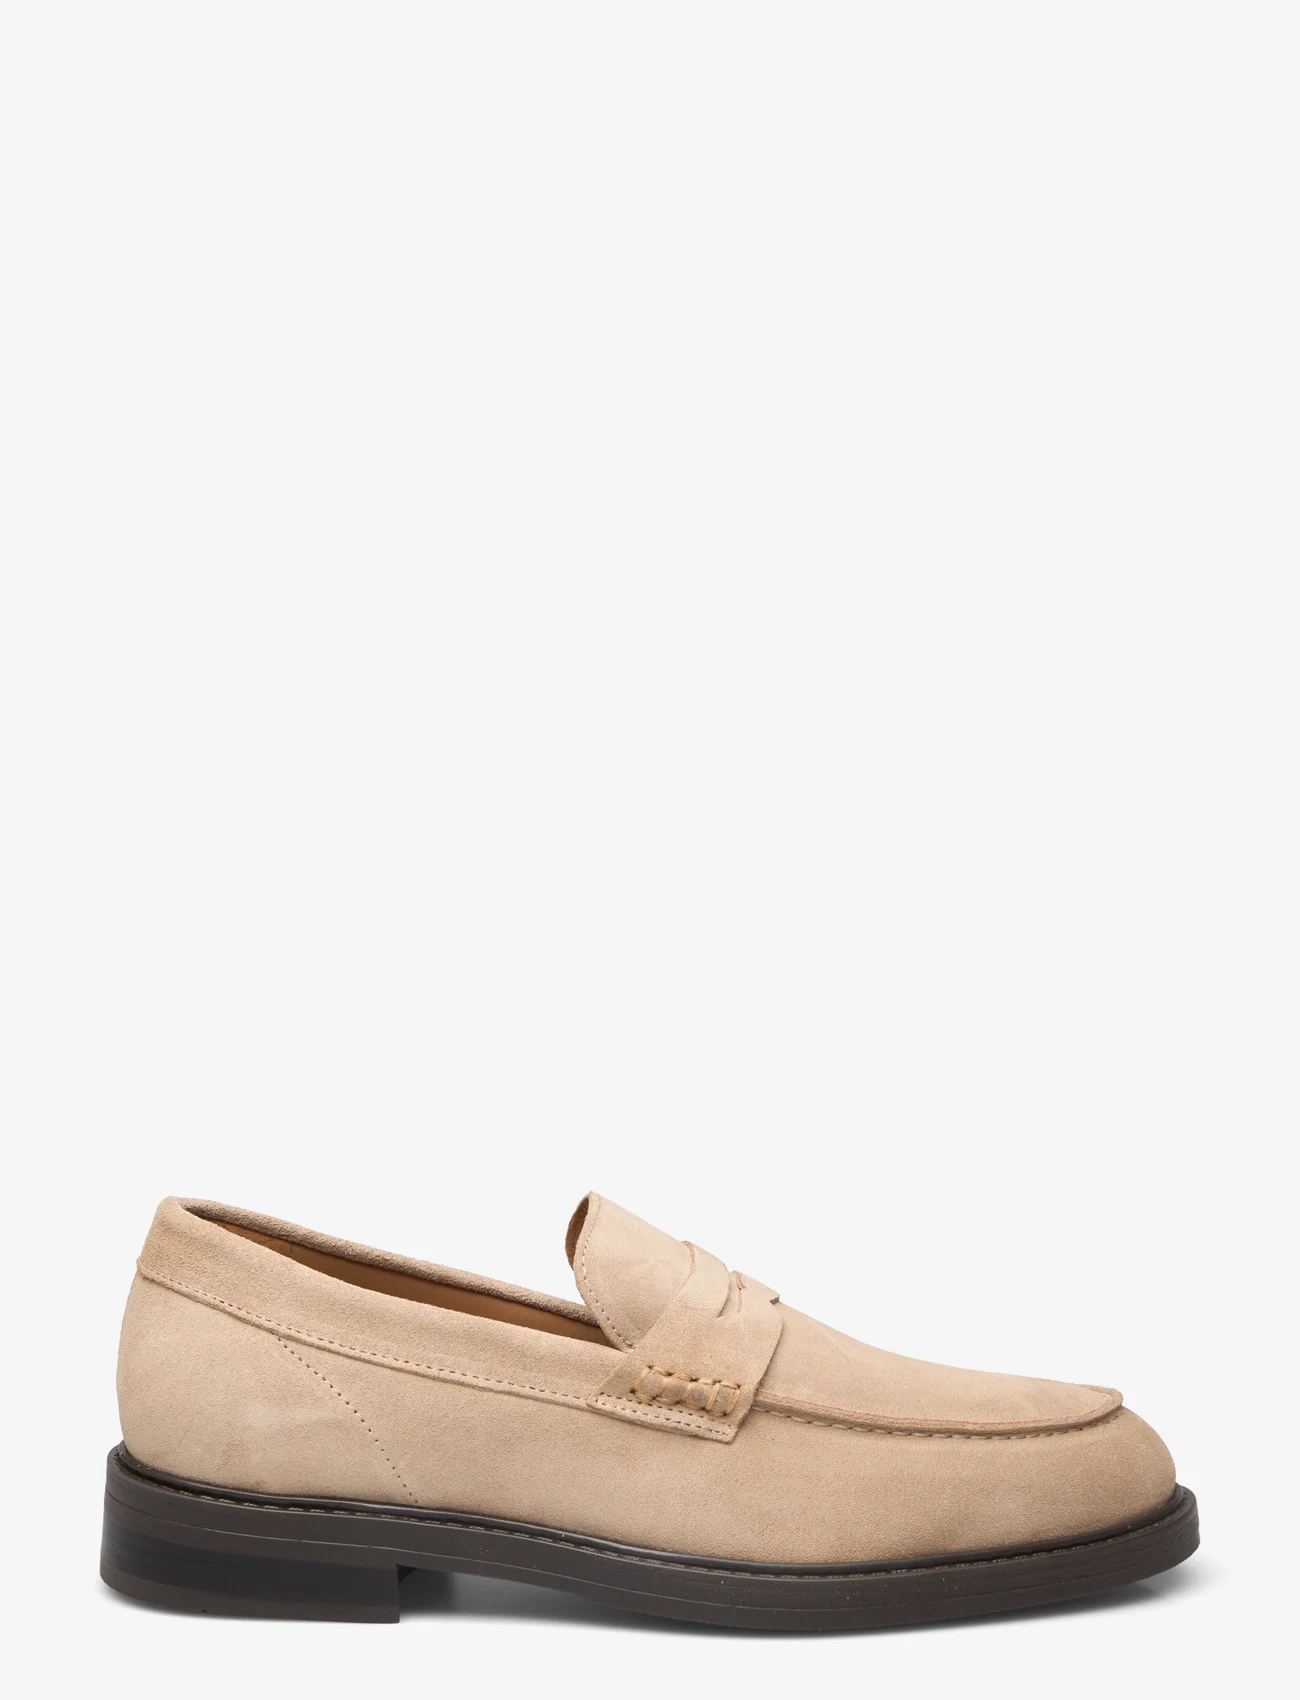 Selected Homme - SLHBLAKE SUEDE PENNY LOAFER - buty wiosenne - sand - 1